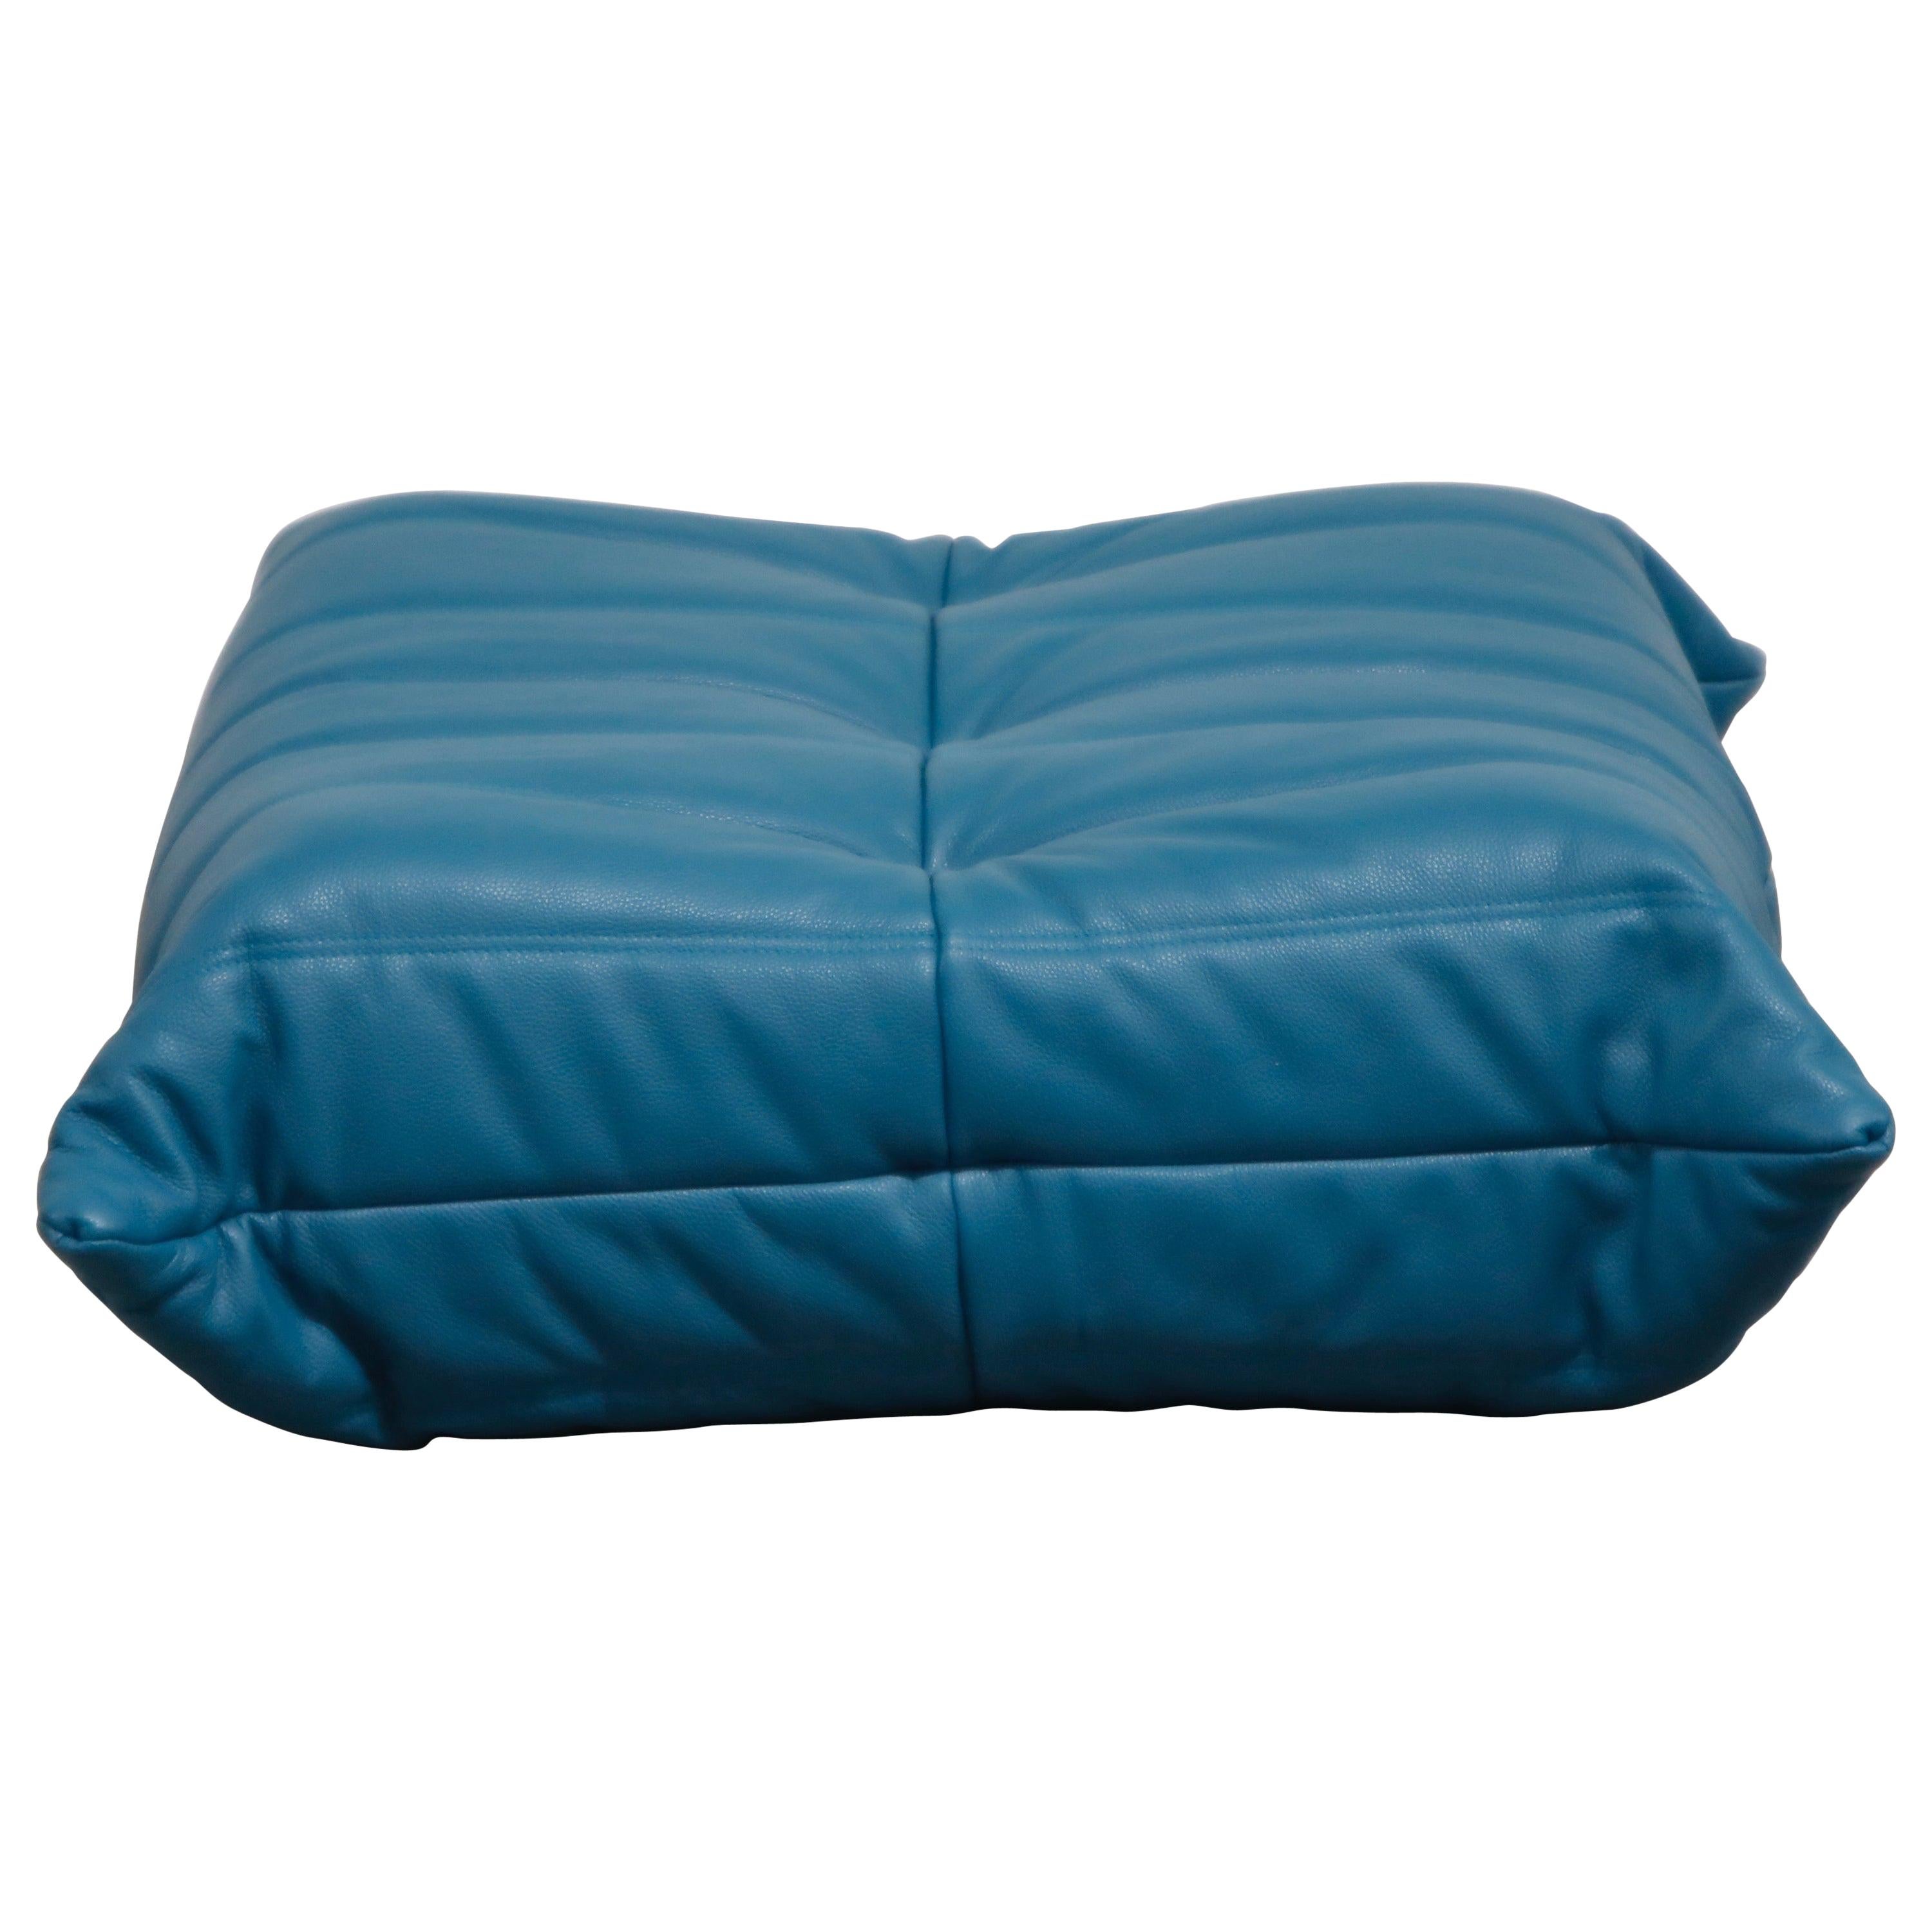 'Togo' Ottoman by Michel Ducaroy for Ligne Roset in Blue Leather